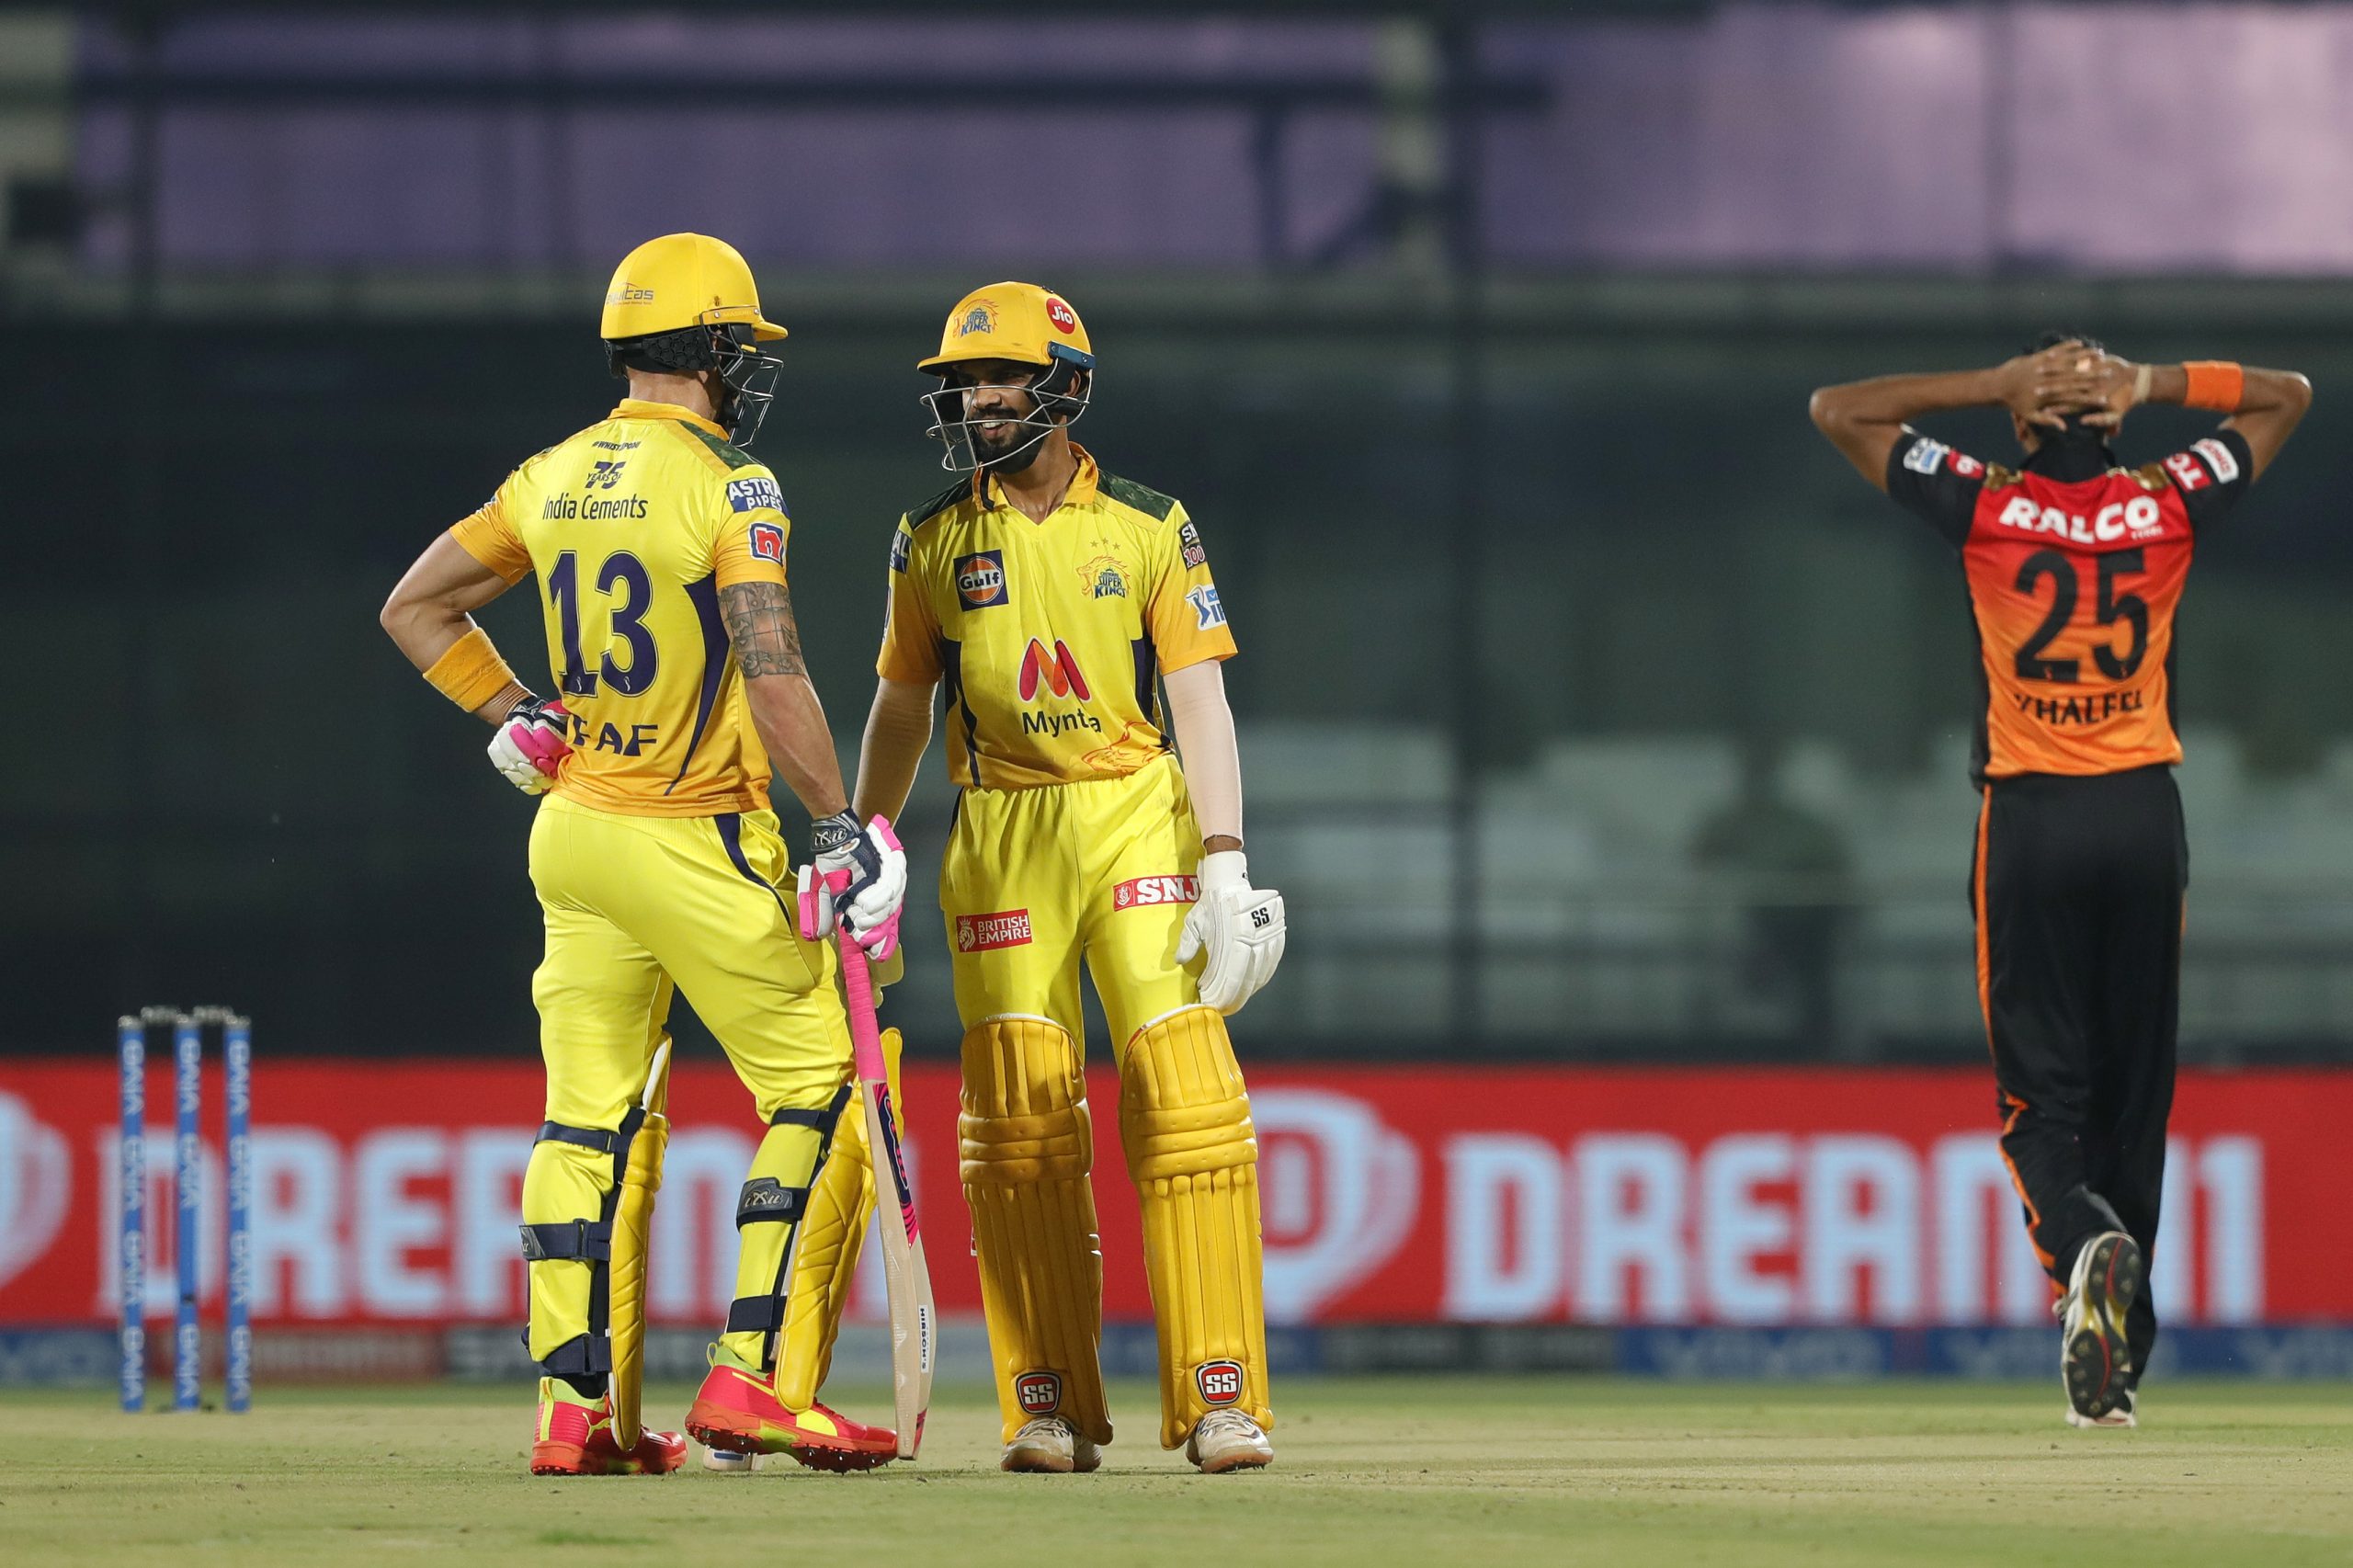 IPL 2021, Match 23 CSK vs SRH: Emphatic Win Takes Chennai Super Kings Top Of The Table